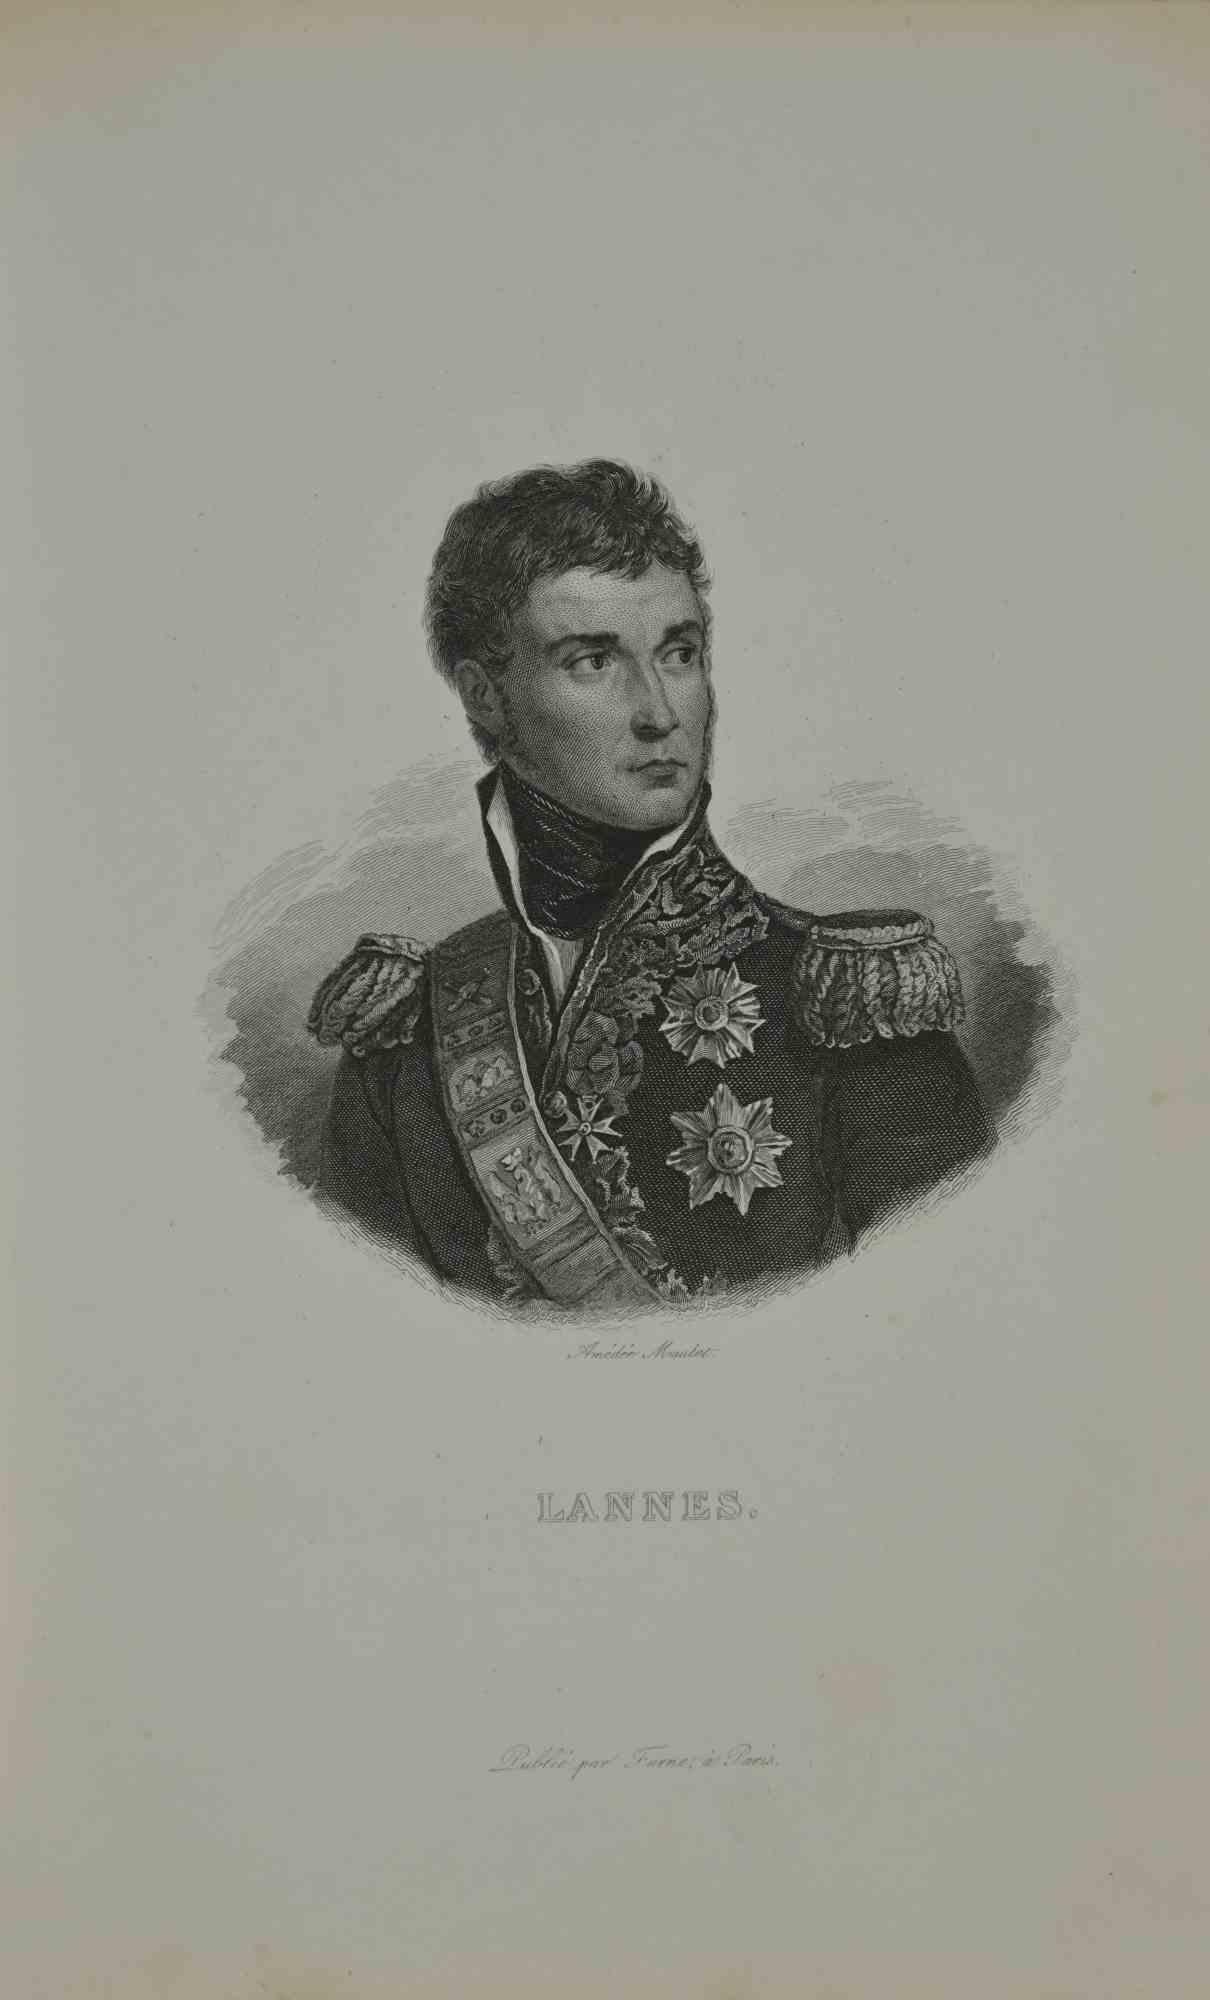 Portrait of Lennes is an etching that belongs to the suite AtlasBatt realized within Jacques Norvins' Histoire de Napoleon, published in 1837.

Author Jacques Norvins published one of the most comprehensive and influential histories on the life and